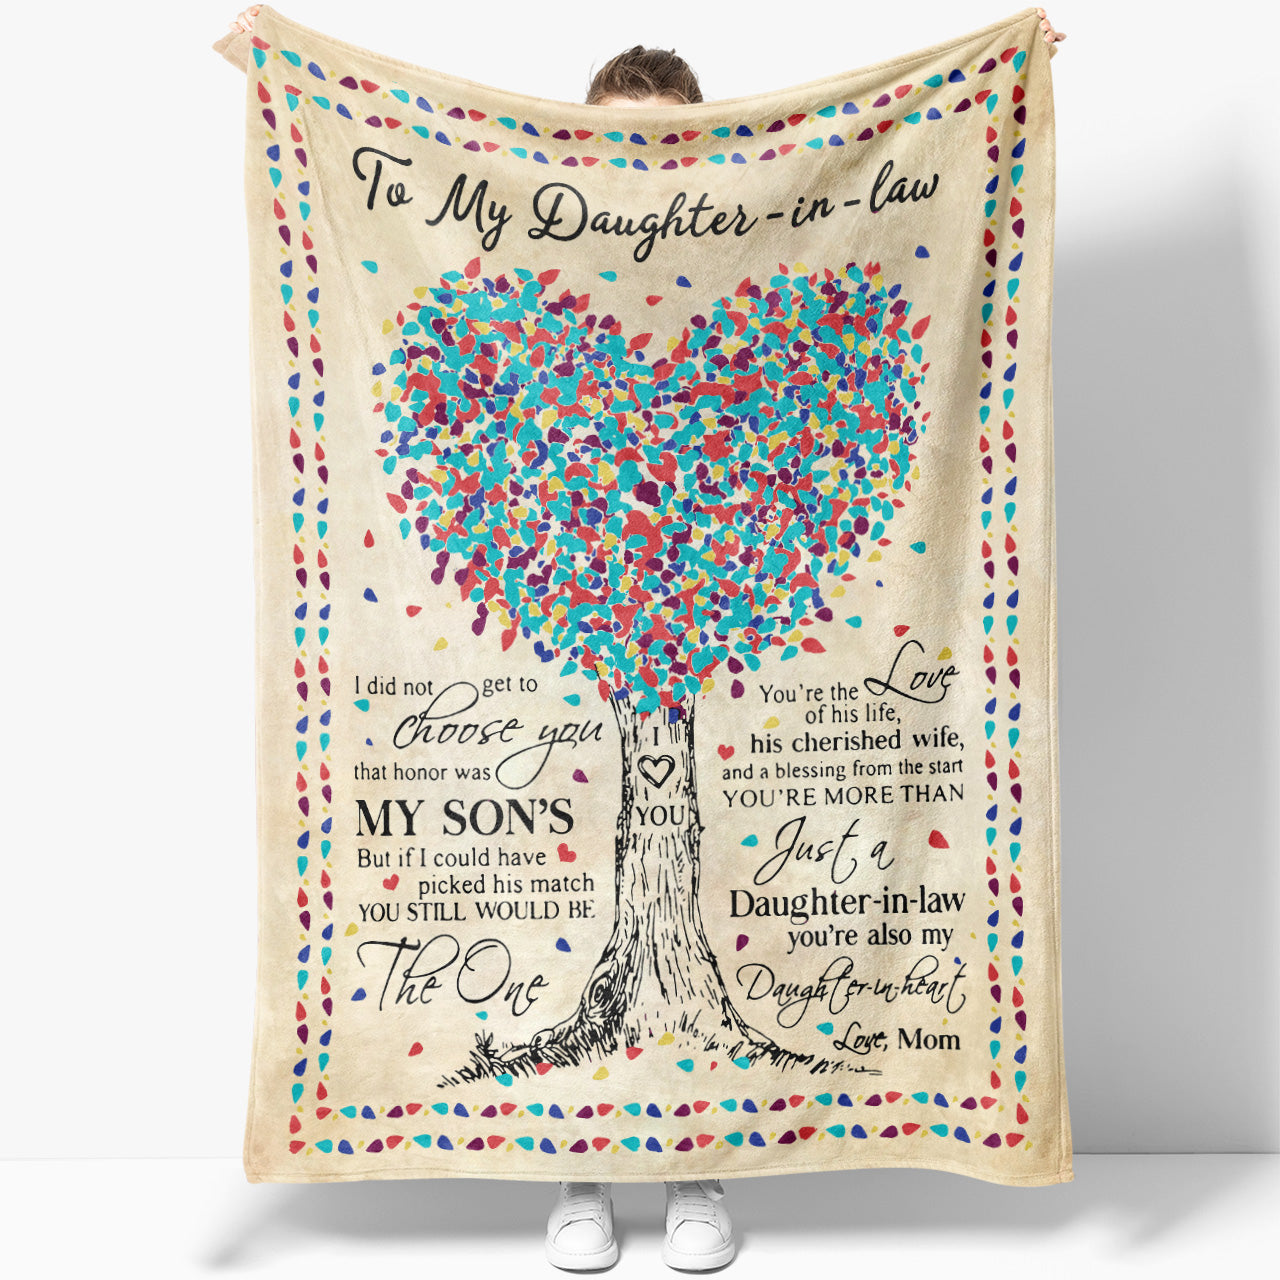 Personalized throw blanket, custom gift for Mom, thank you gift